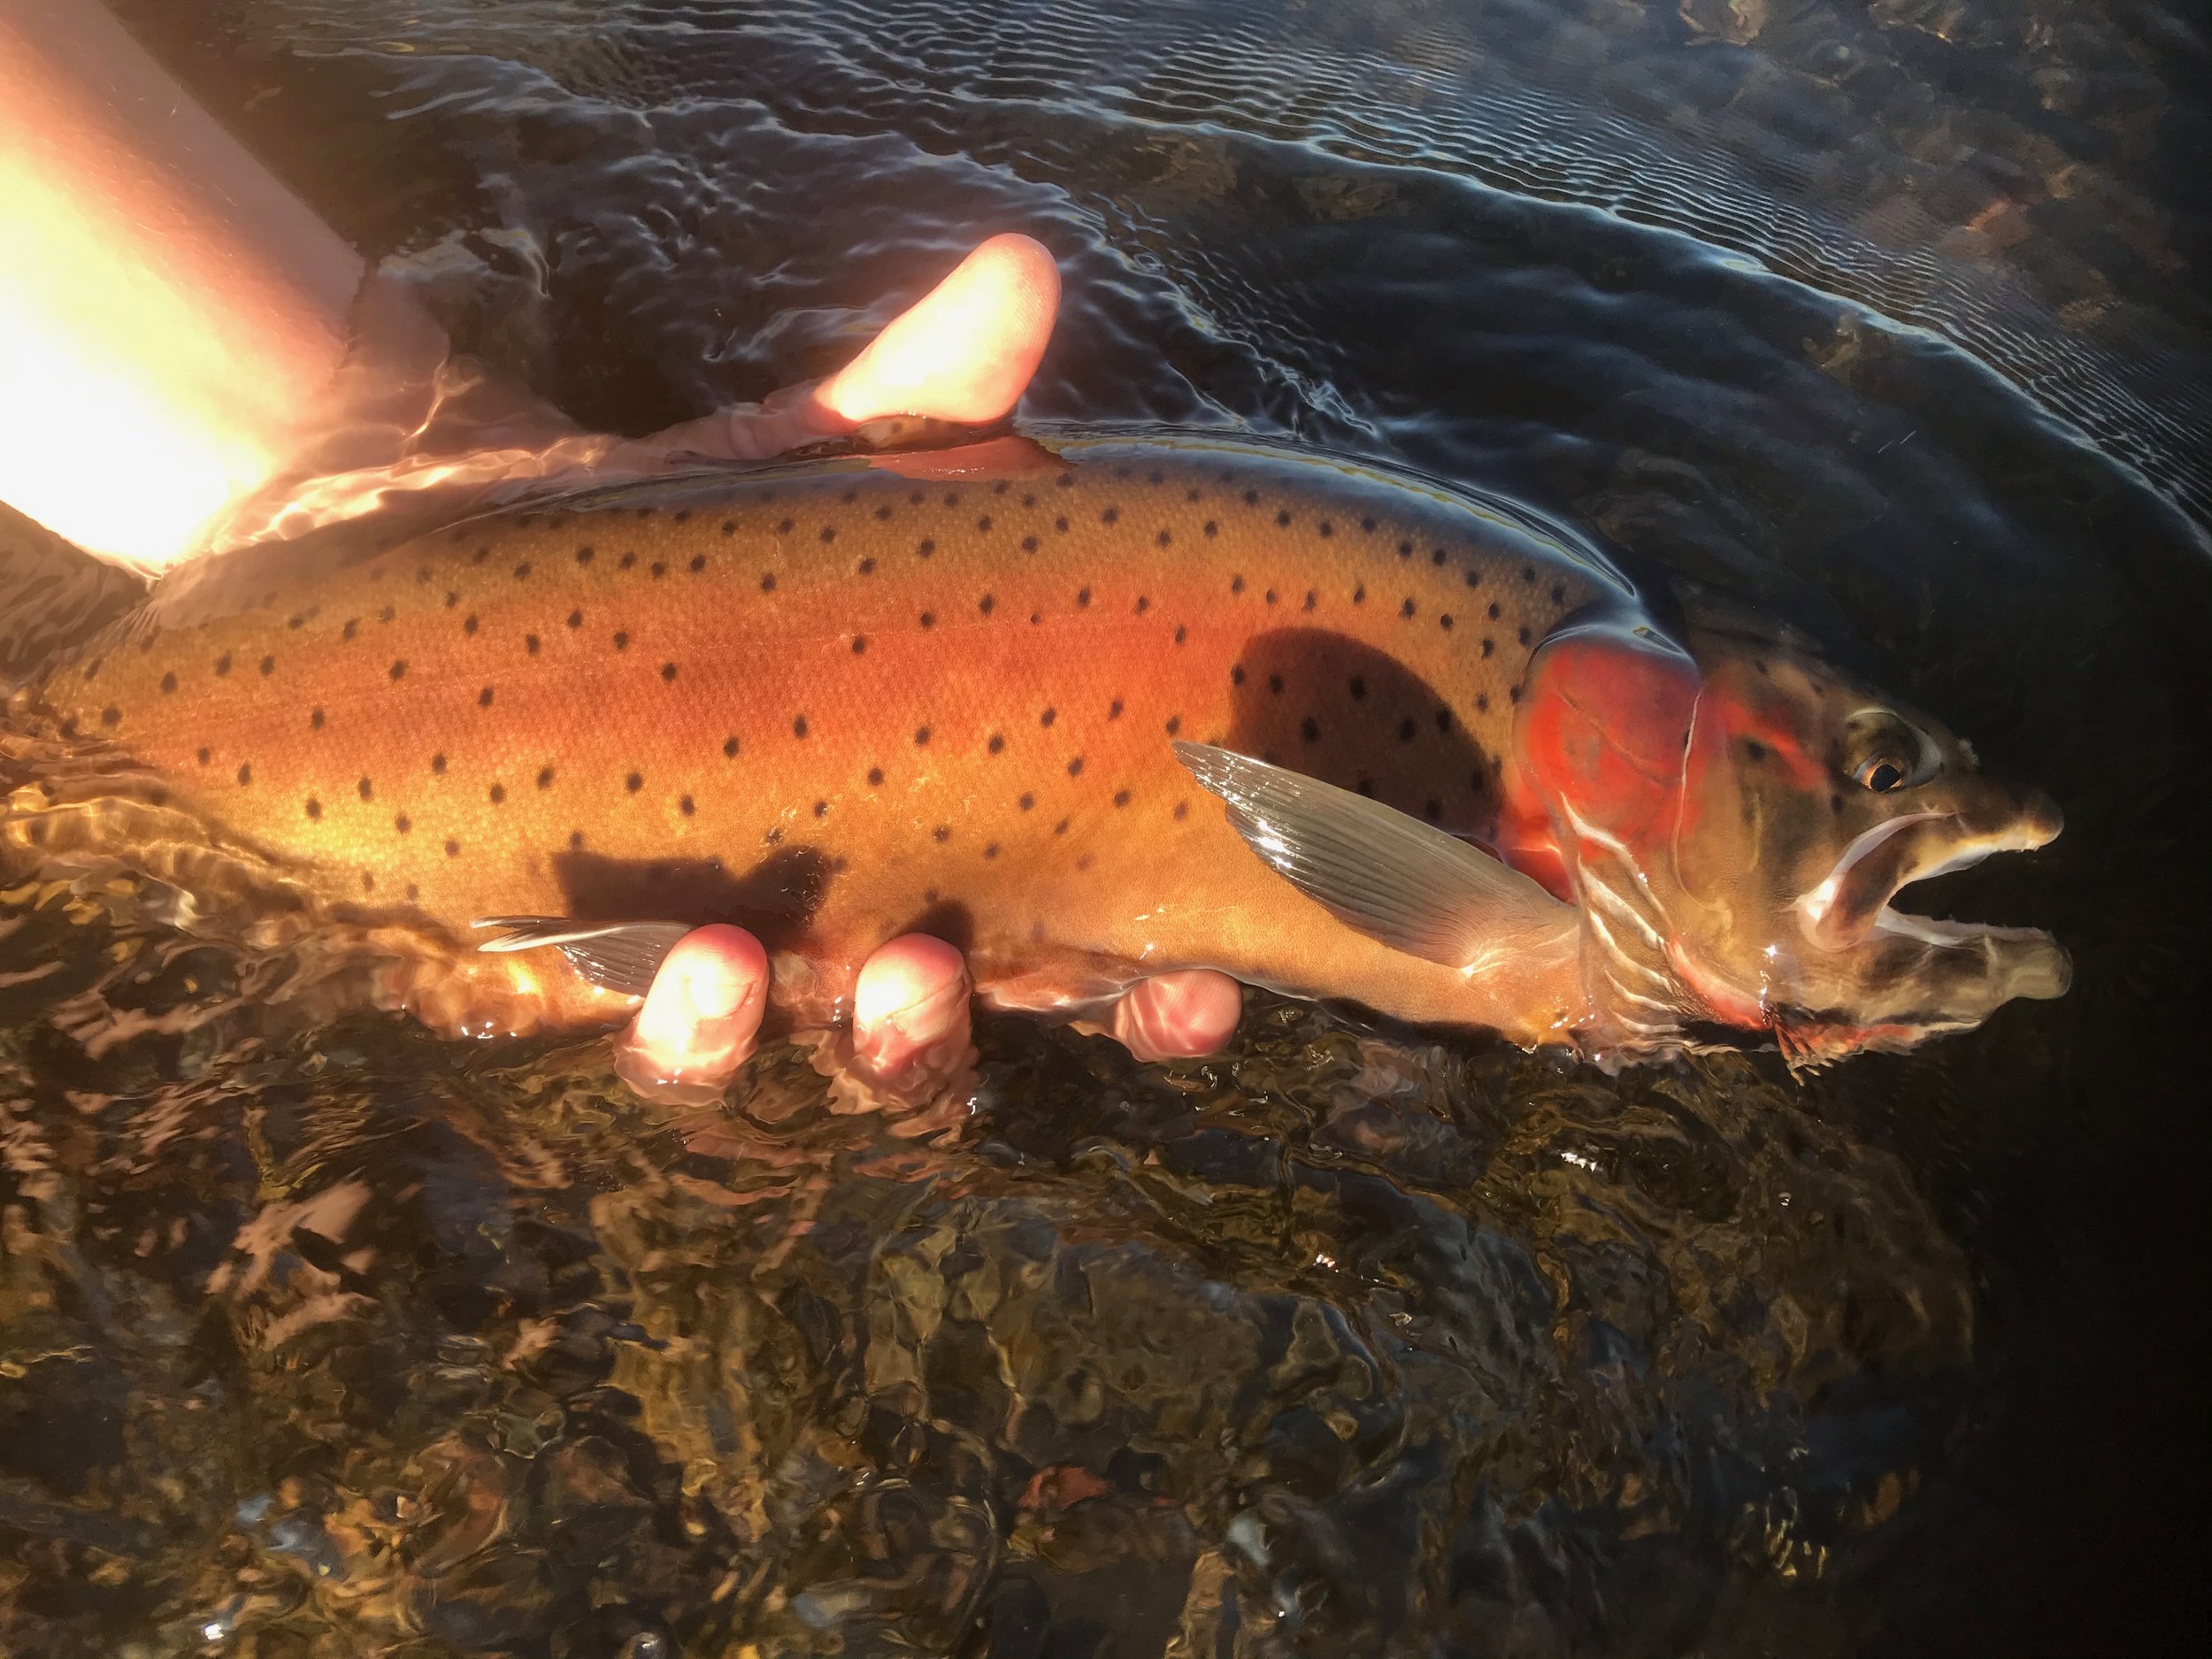 Colorado Cutthroat Trout Fishing (ACTIVE TROUT BITE!) 